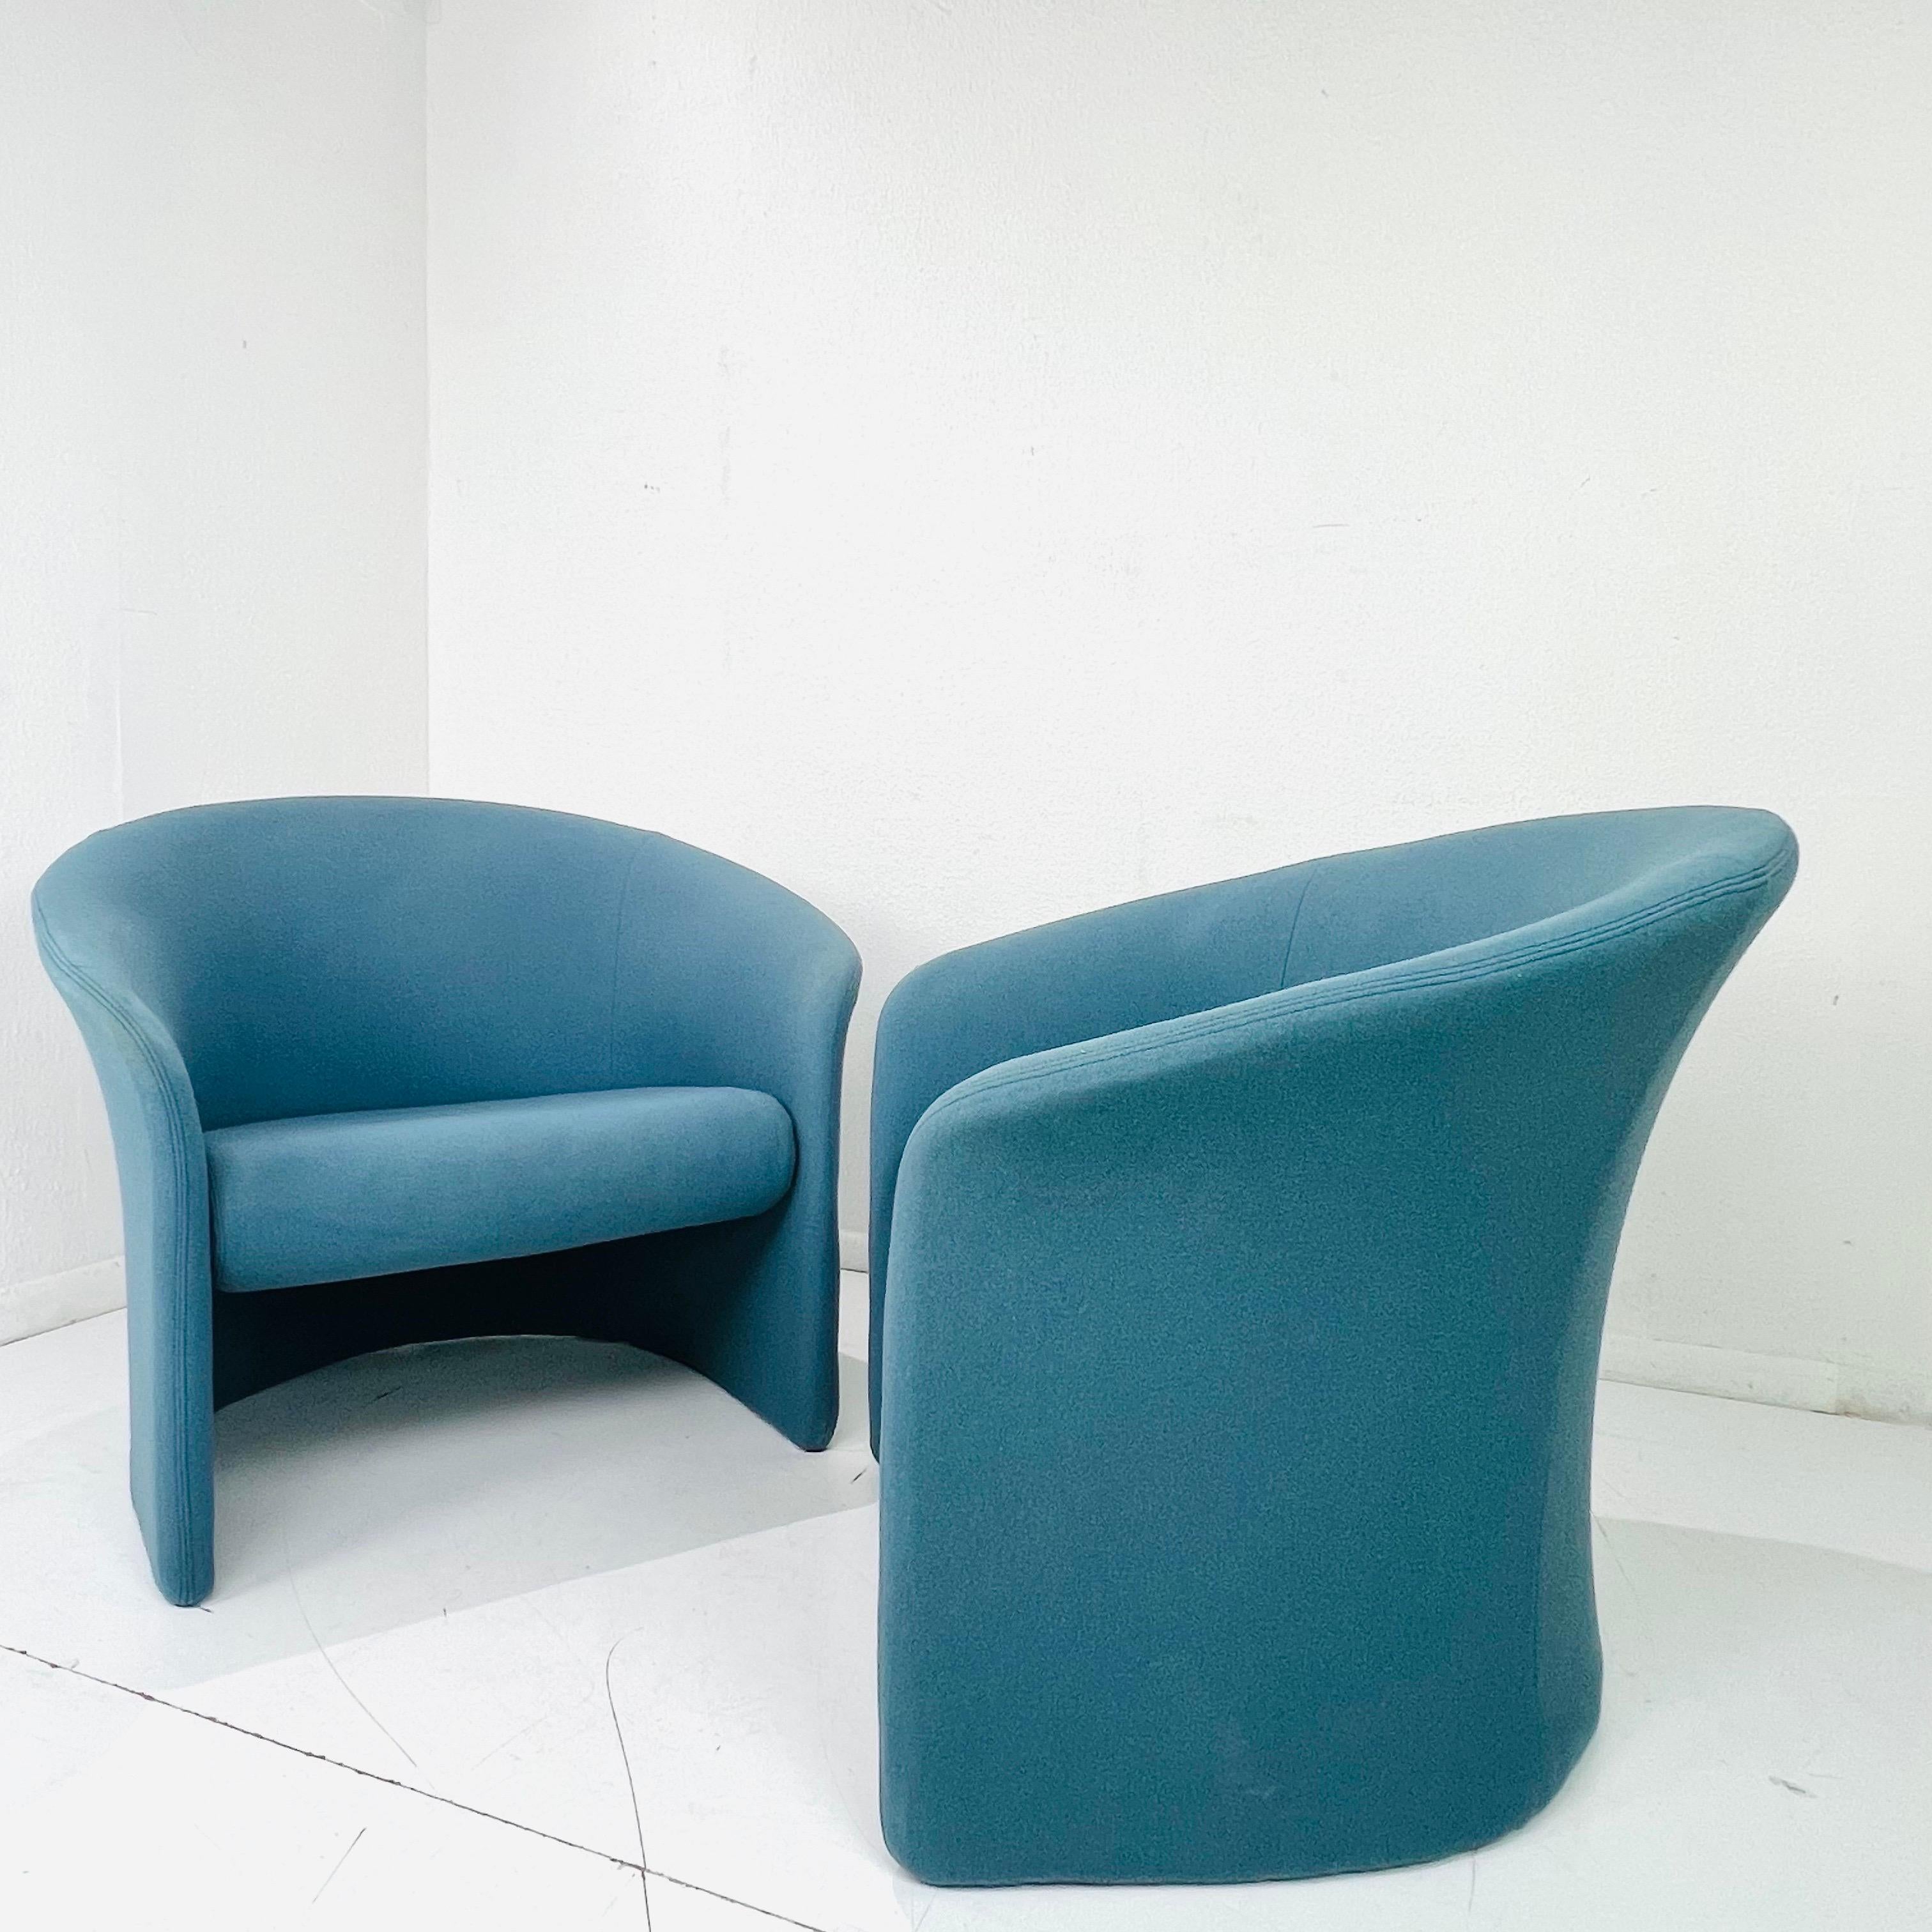 Pair of Postmodern Tub Chairs by Massimo Vignelli For Sale 5